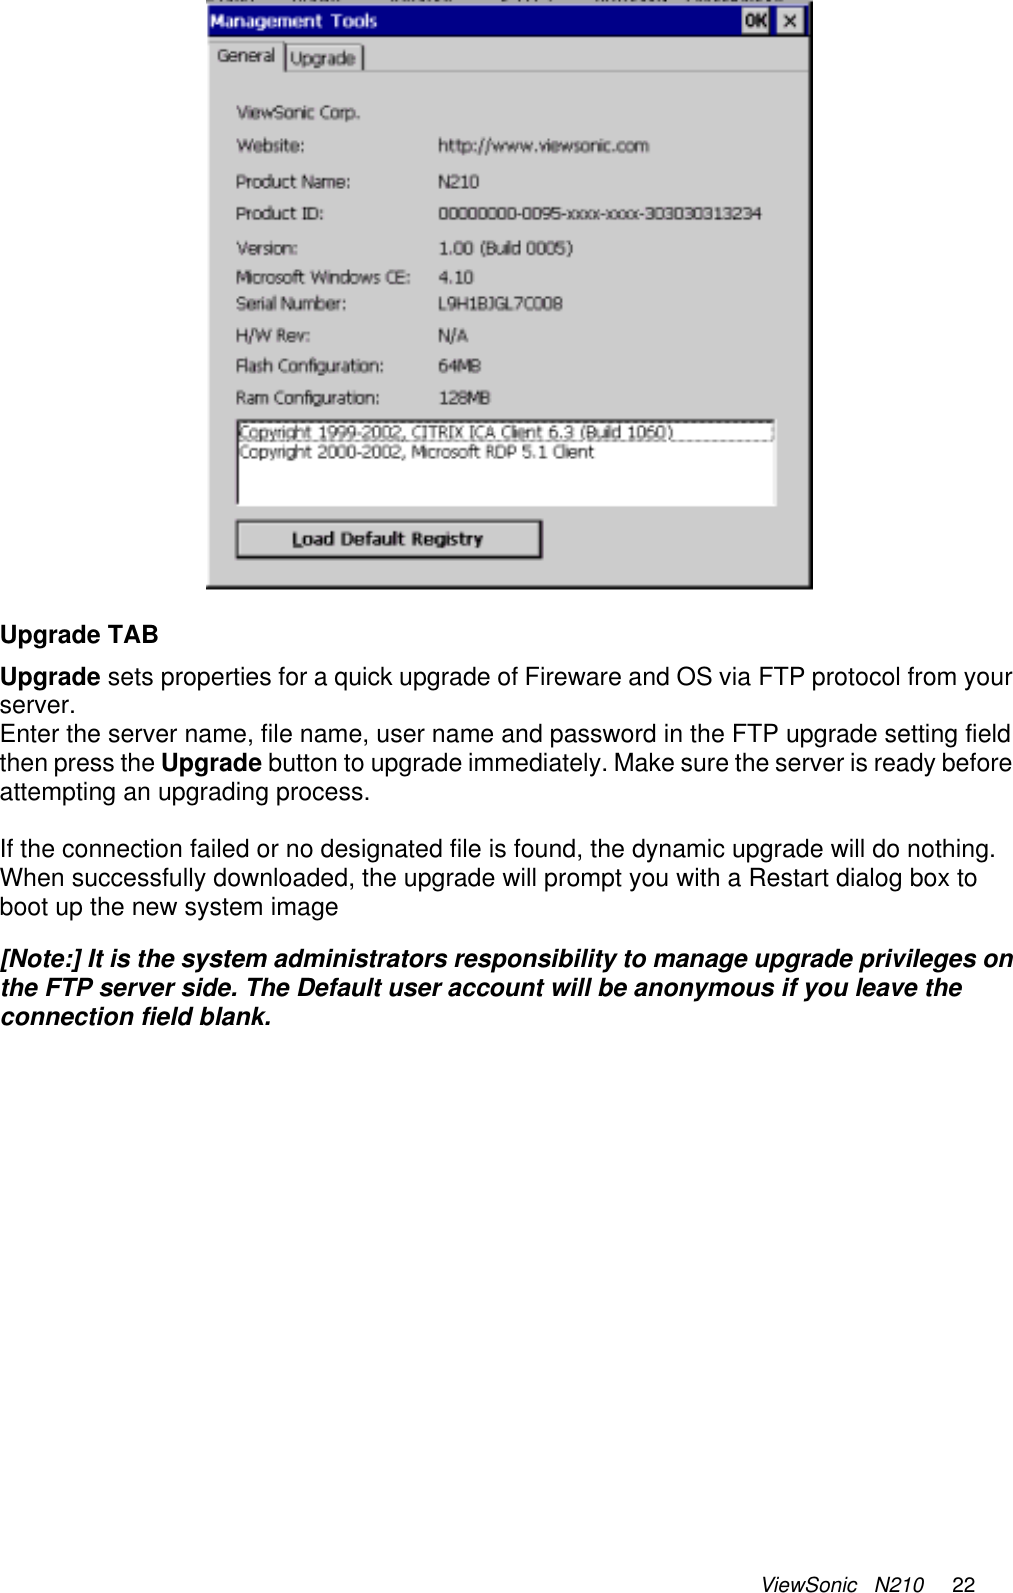 ViewSonic   N210     22   Upgrade TAB Upgrade sets properties for a quick upgrade of Fireware and OS via FTP protocol from your server. Enter the server name, file name, user name and password in the FTP upgrade setting field then press the Upgrade button to upgrade immediately. Make sure the server is ready before attempting an upgrading process.   If the connection failed or no designated file is found, the dynamic upgrade will do nothing. When successfully downloaded, the upgrade will prompt you with a Restart dialog box to boot up the new system image   [Note:] It is the system administrators responsibility to manage upgrade privileges on the FTP server side. The Default user account will be anonymous if you leave the connection field blank.    